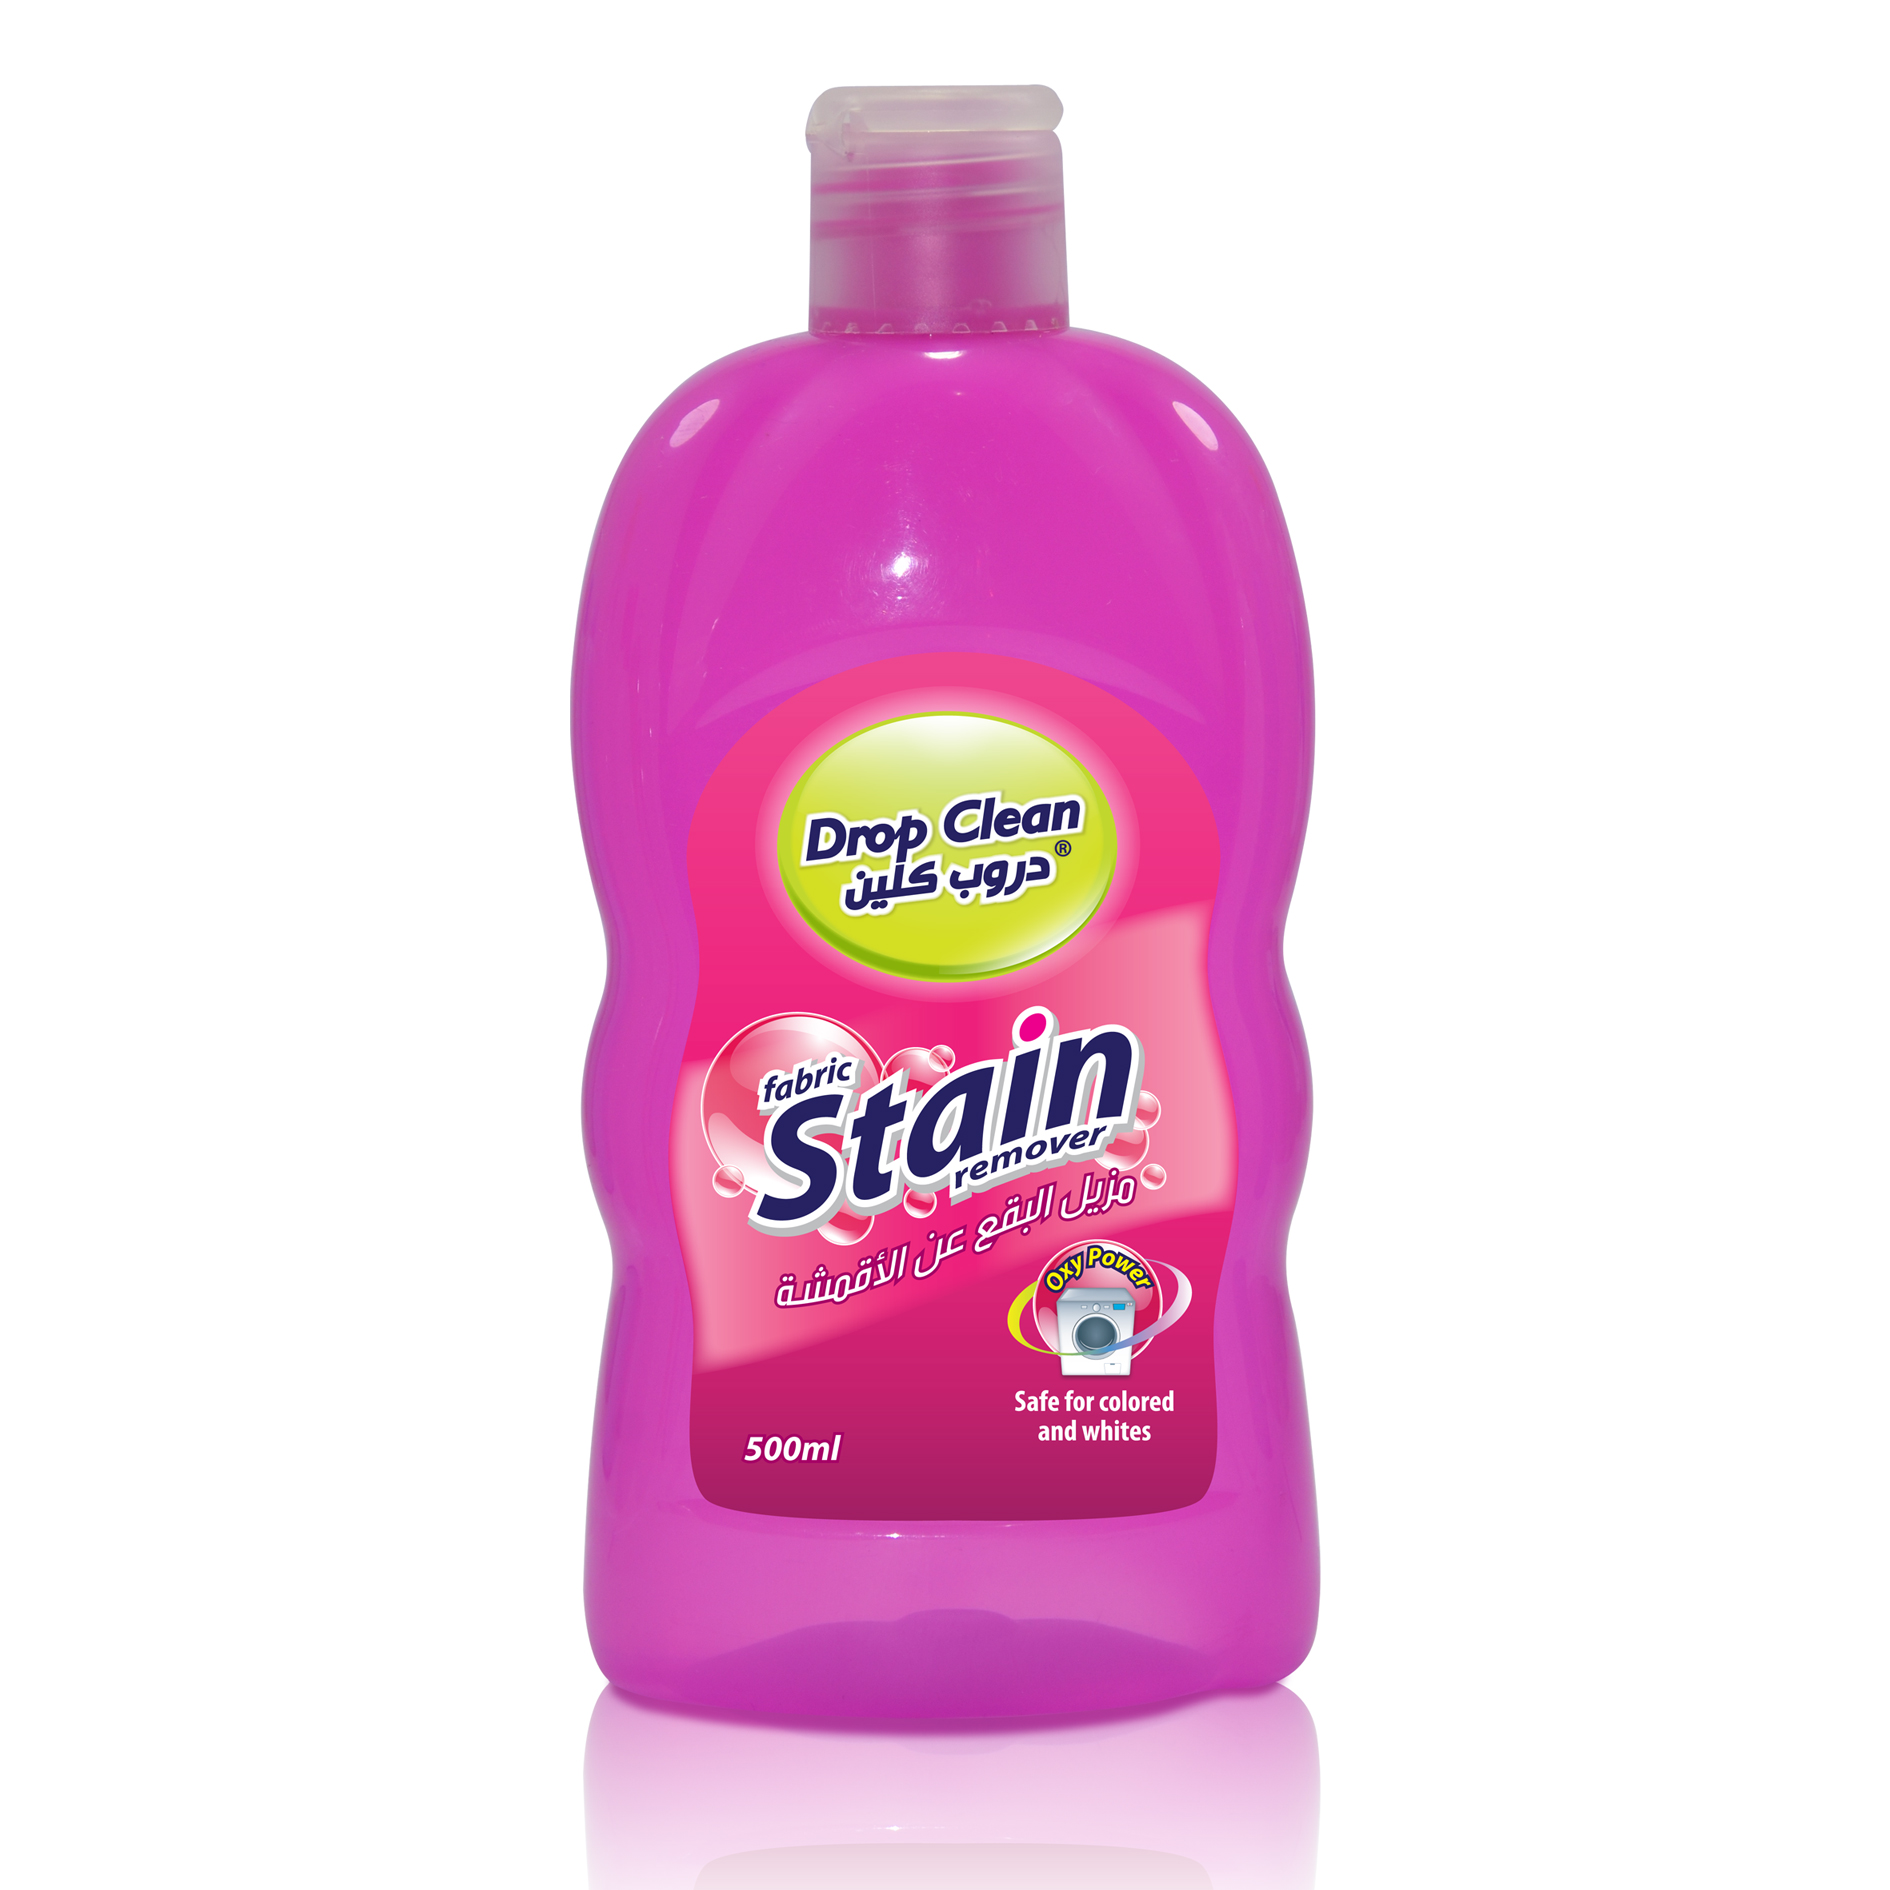 Drop Clean Antibacterial Fabric Stain Remover